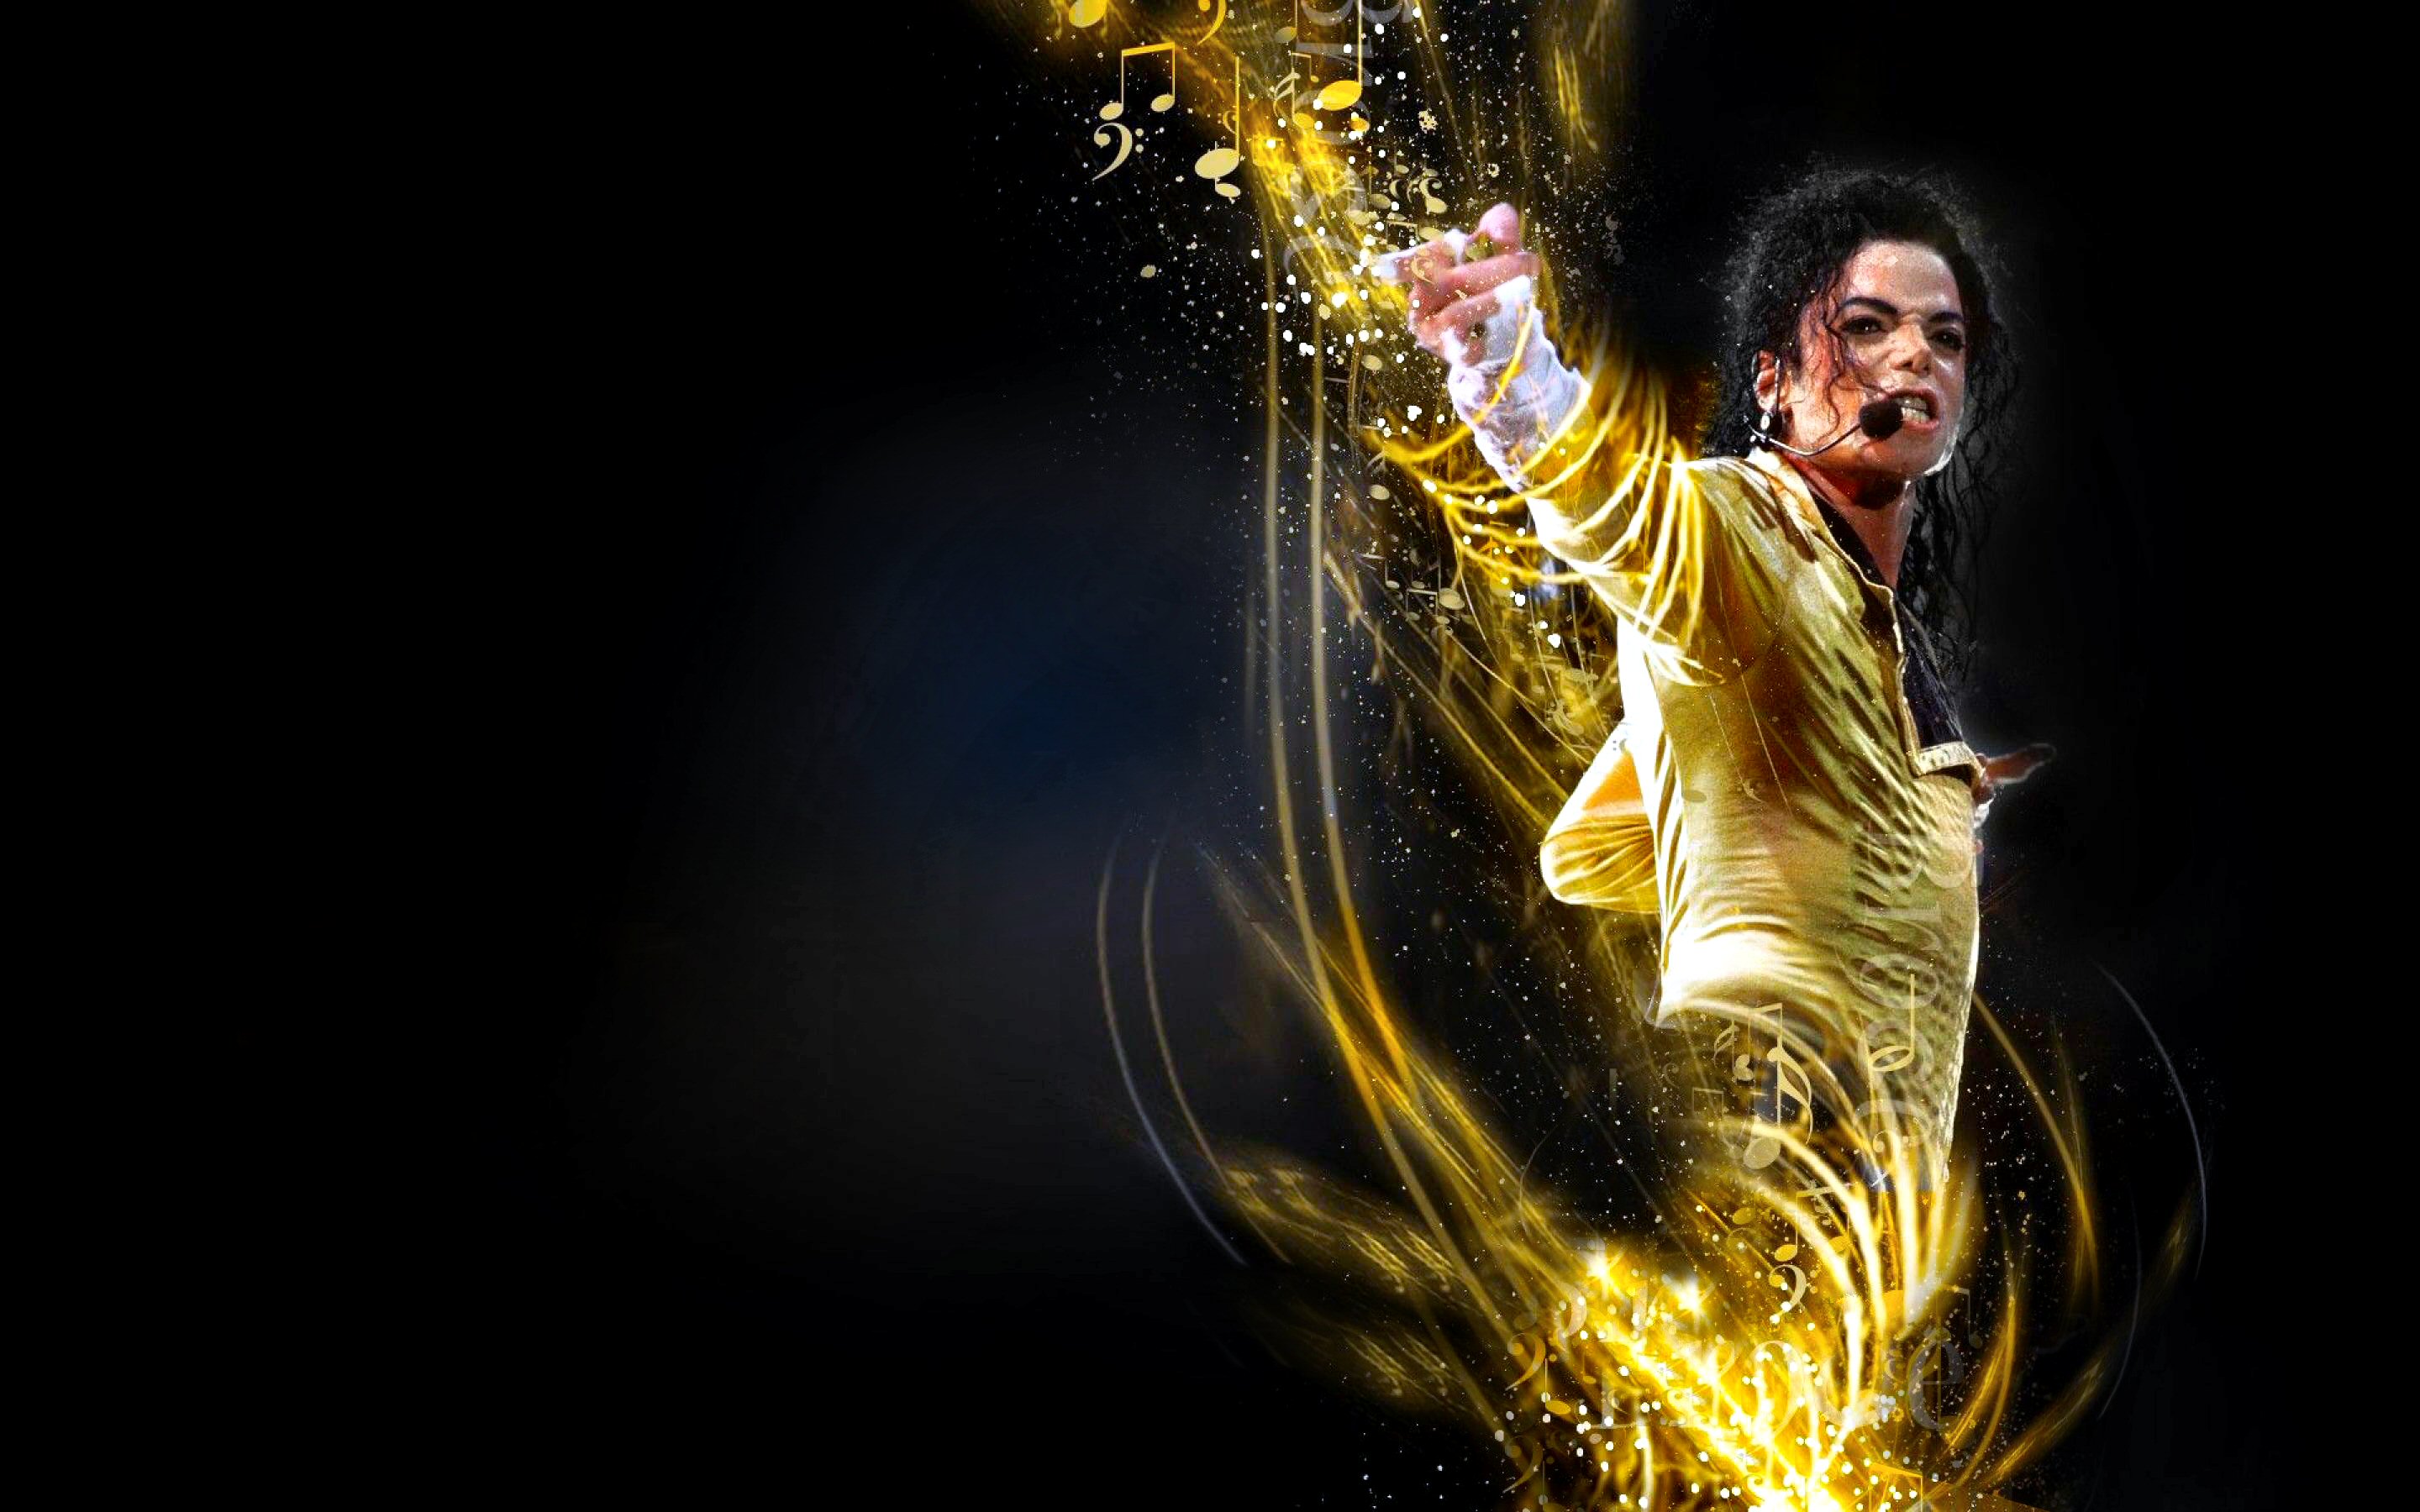 7680x43 Michael Jackson Music Wallpapers 8k Wallpaper Hd Celebrities 4k Wallpapers Images Photos And Background Wallpapers Den